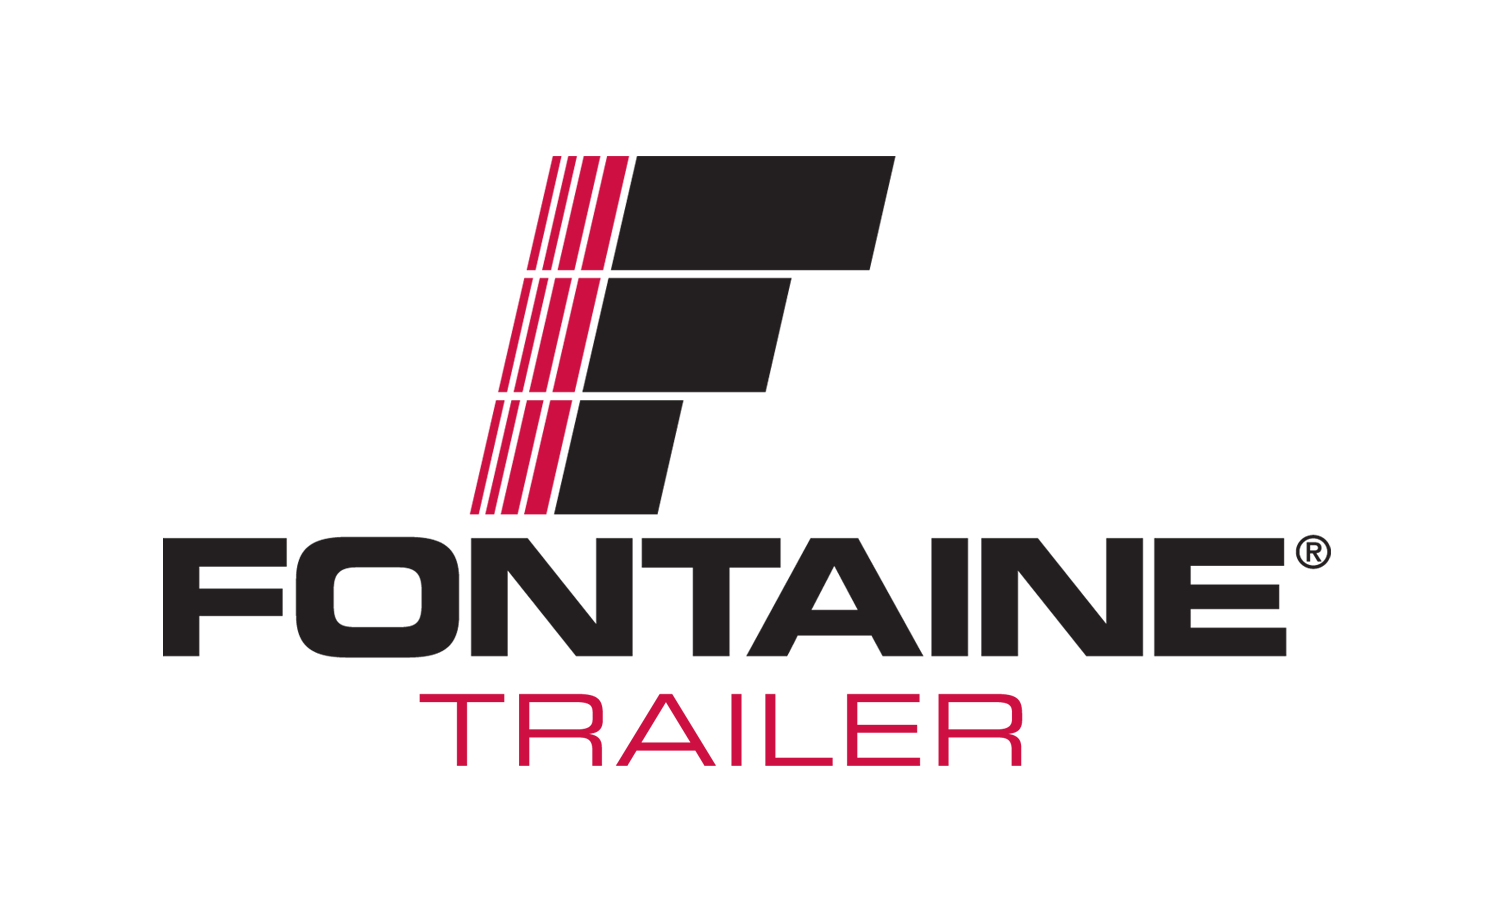 Trailers Logo - Fontaine Trailer -- Flatbed trailers, Flat bed trailers, Trailer ...